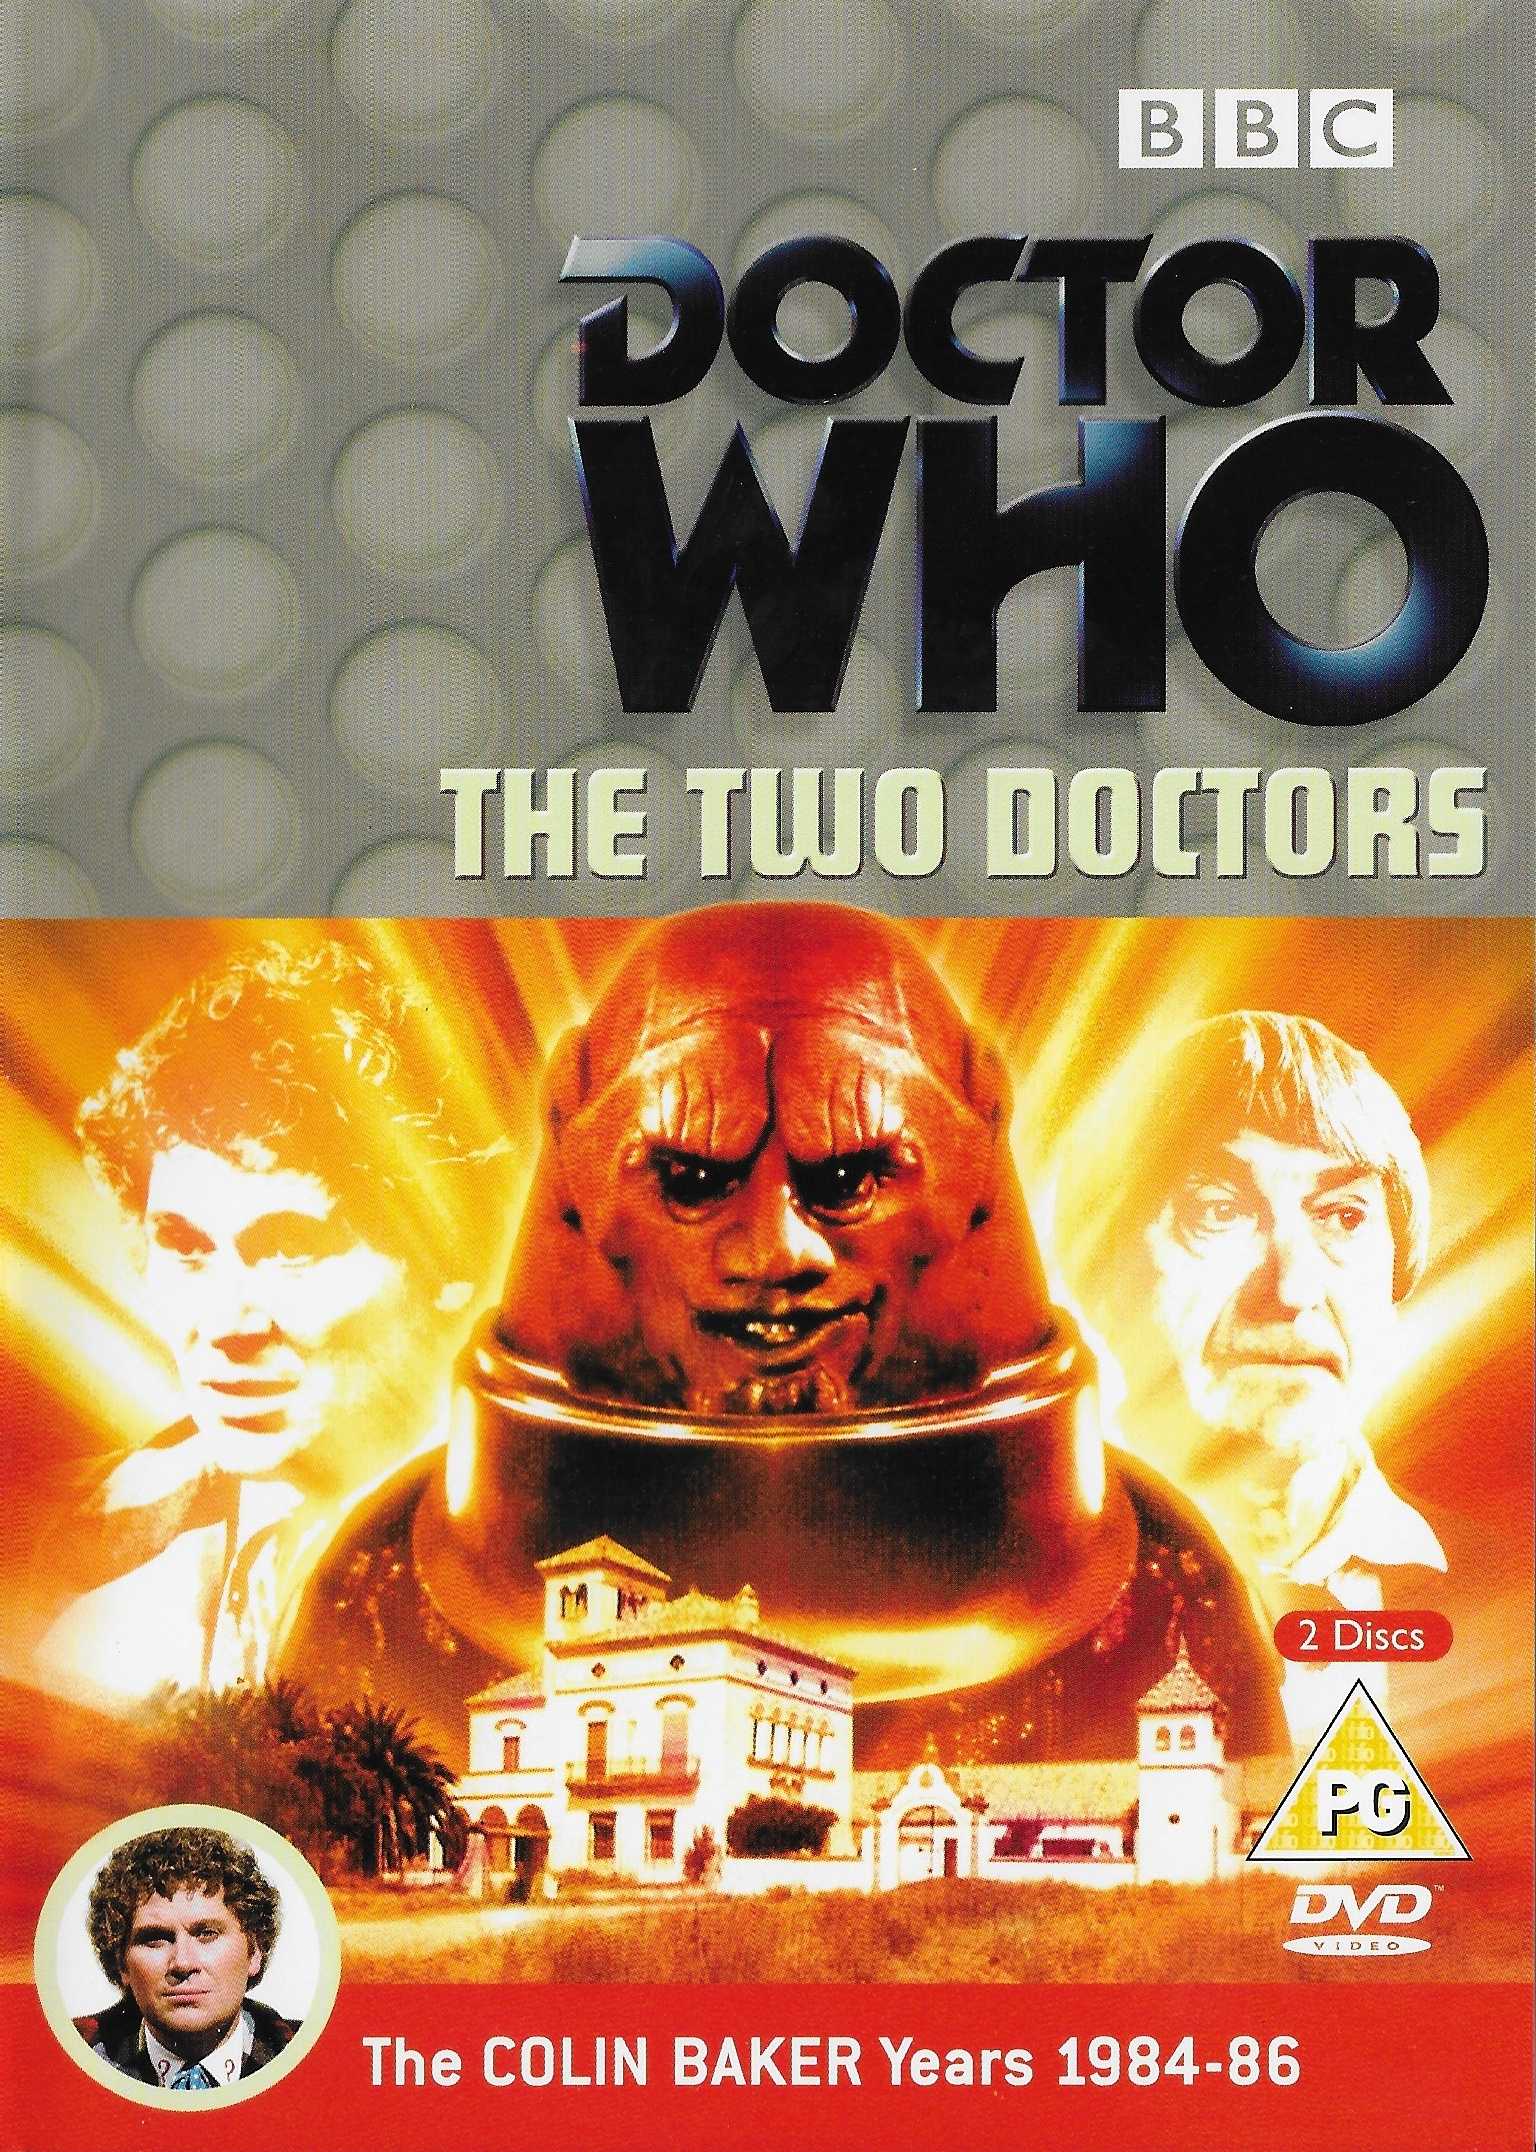 Picture of BBCDVD 1213 Doctor Who - The two doctors by artist Robert Holmes from the BBC records and Tapes library